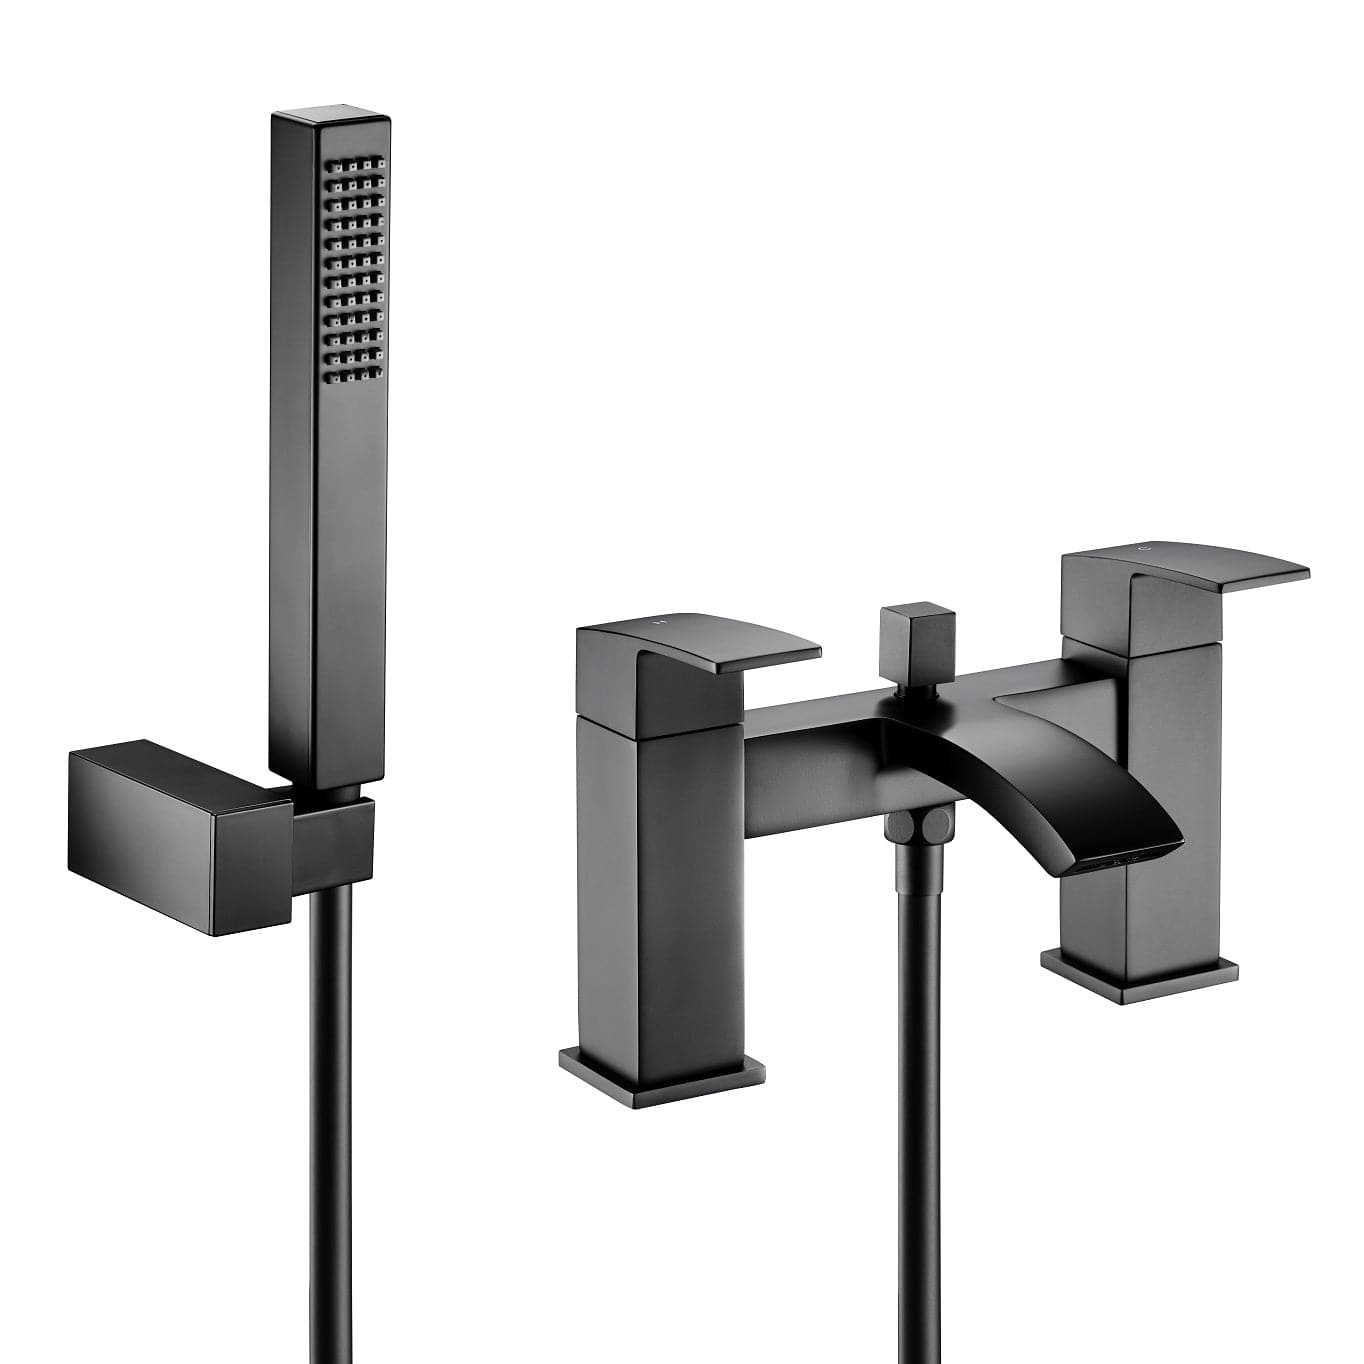 Trace Bath Shower Mixer Tap with Kit in Matt Black, featuring a modern design, durable construction, and a sleek finish - perfect for contemporary UK bathrooms.